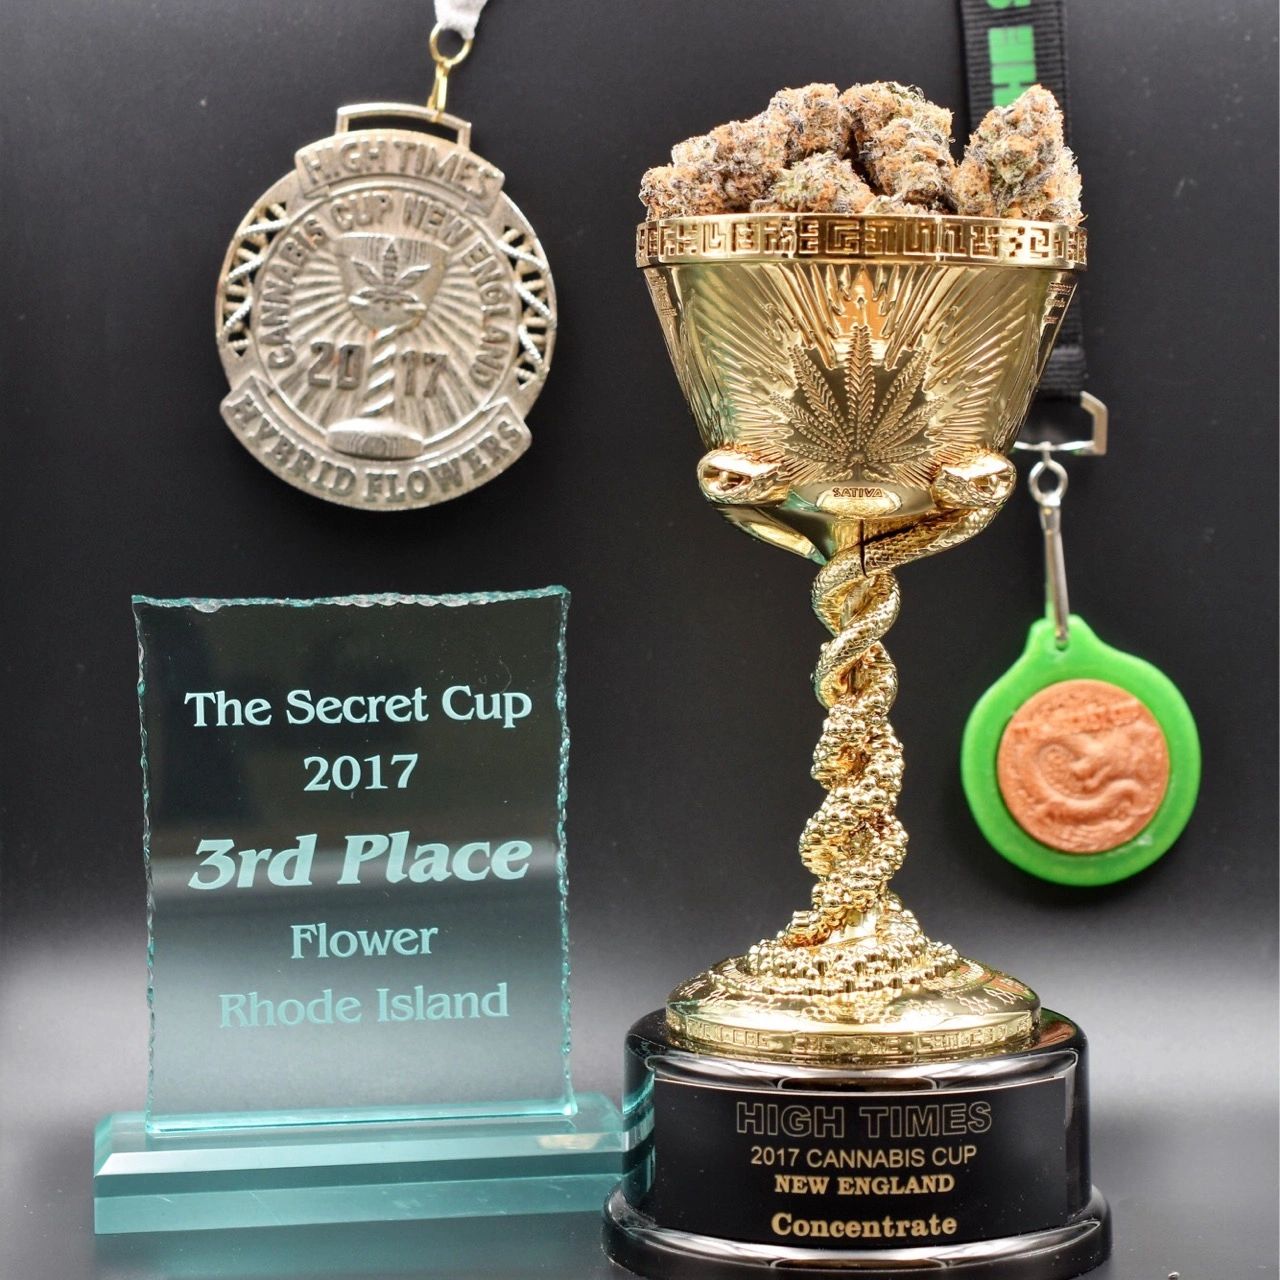 Trophy, medal, and plaque showing placement in different cannabis events